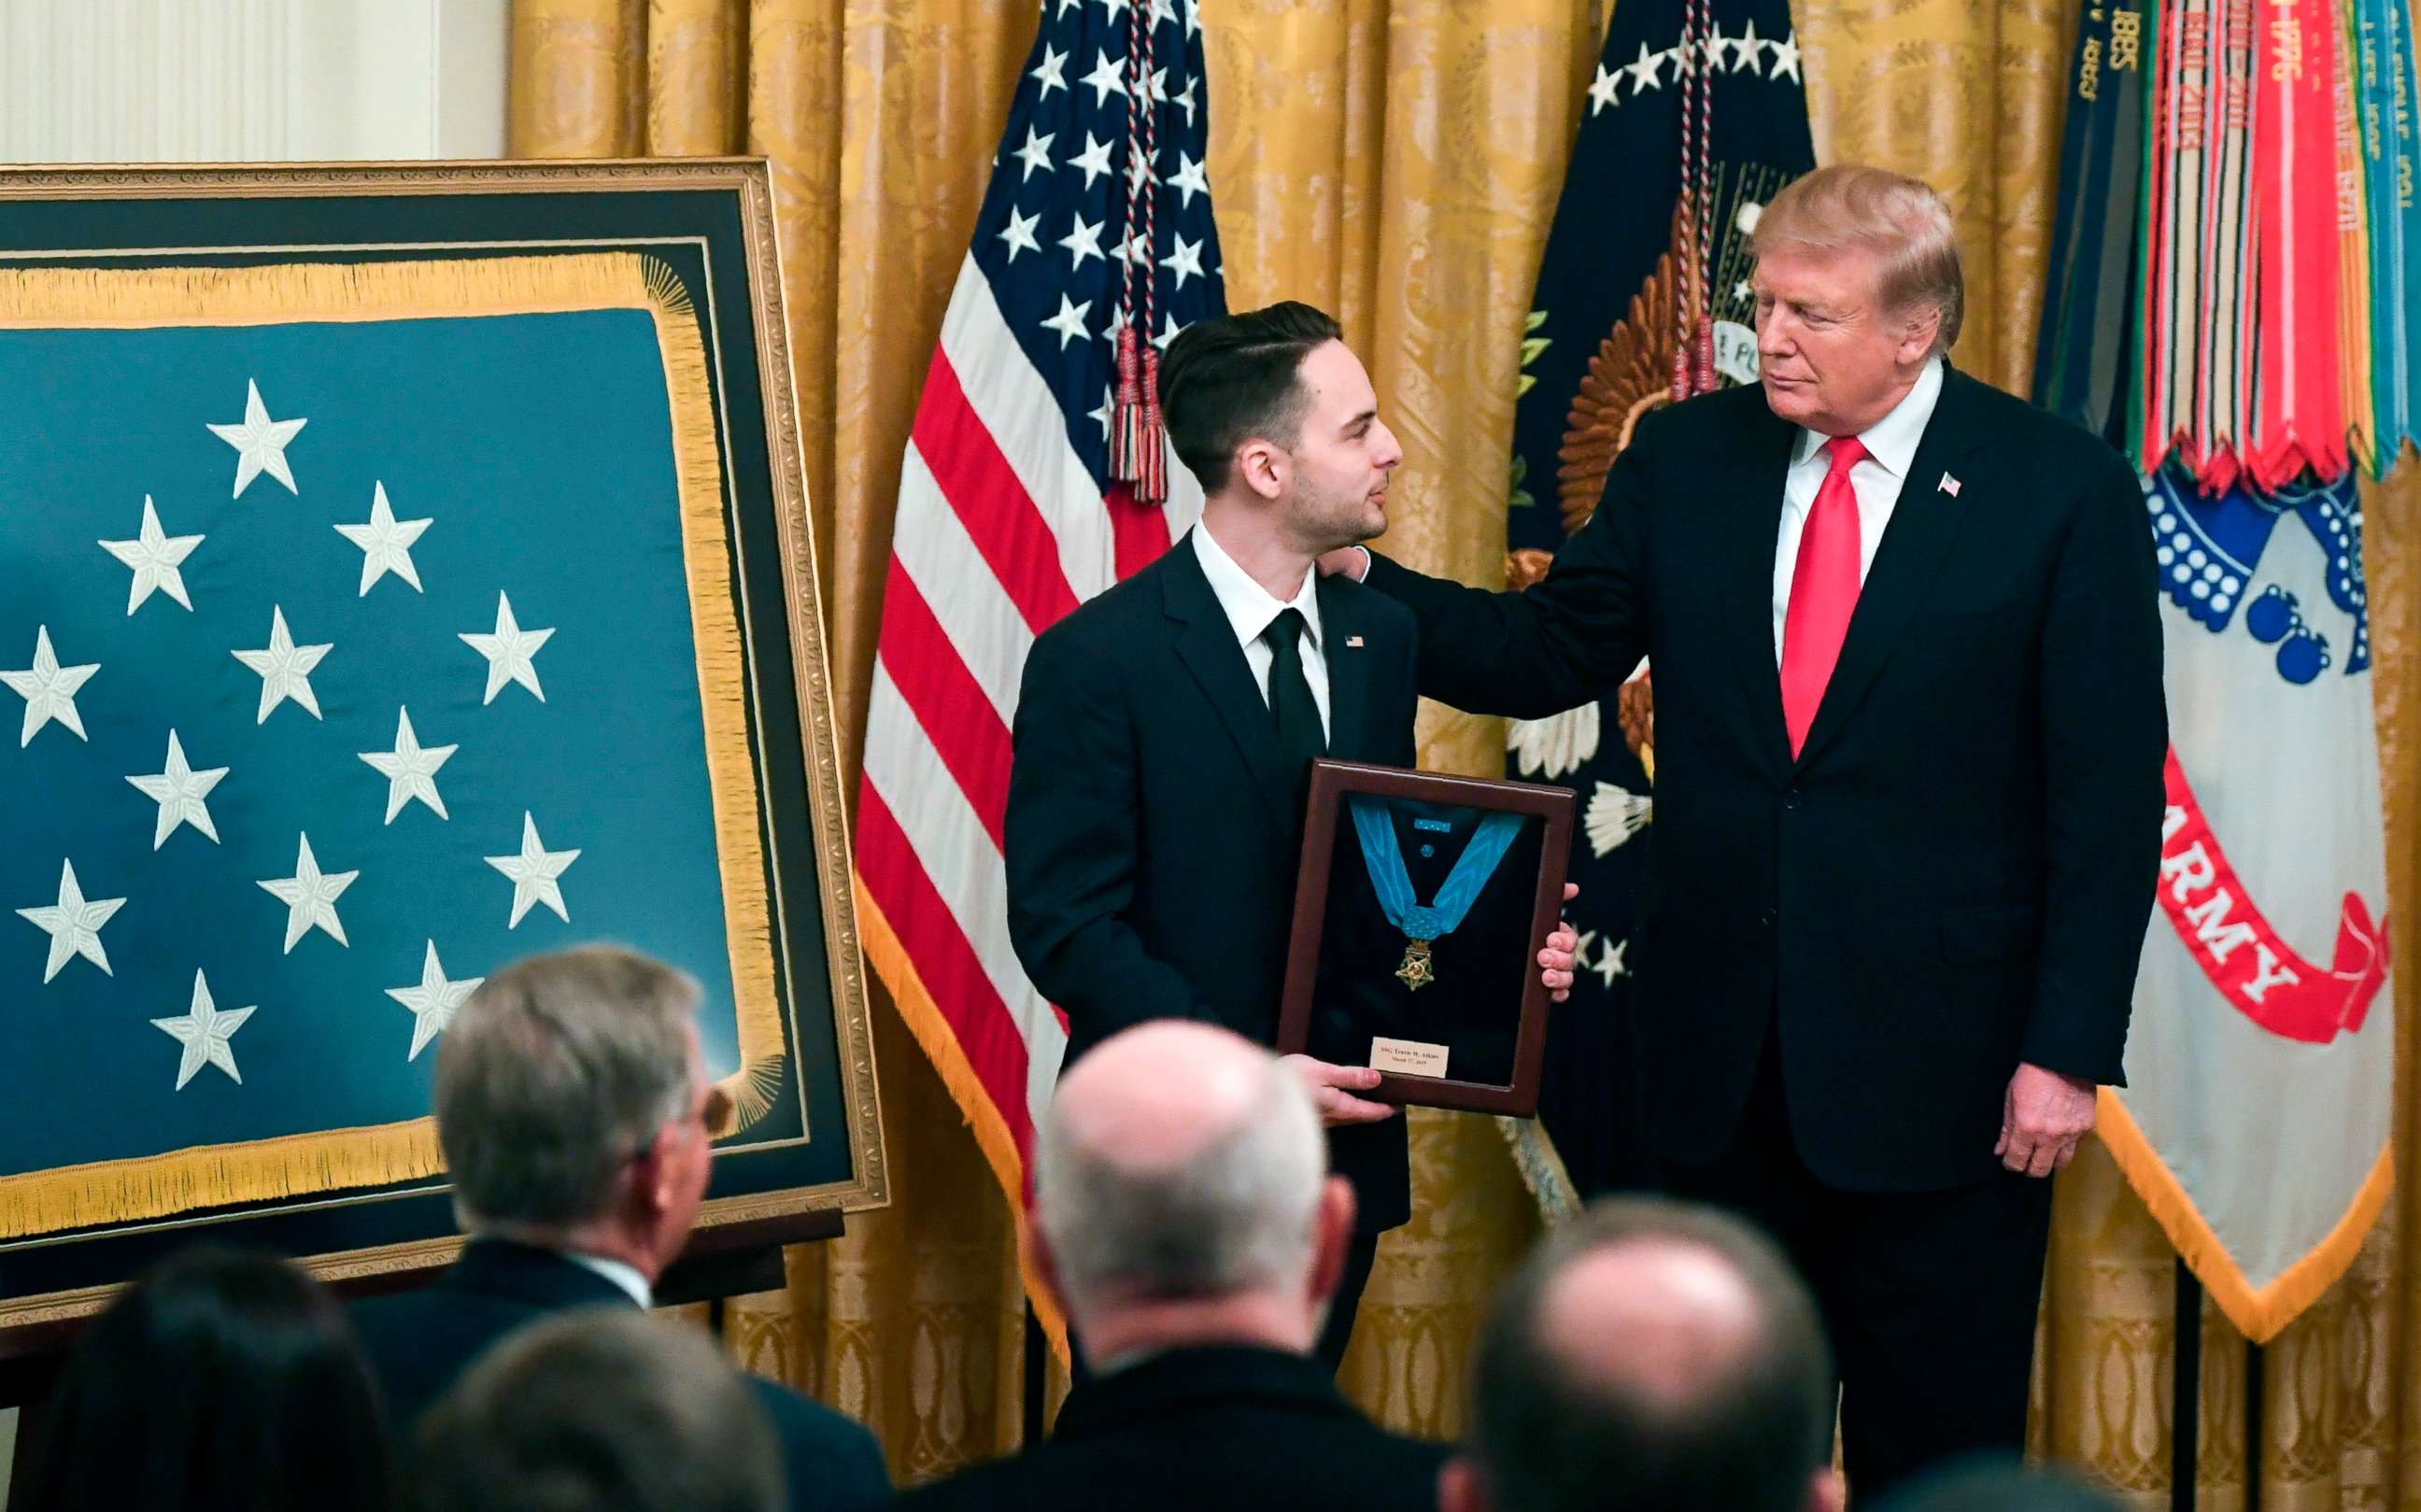 PHOTO: President Donald Trump presents a posthumous Medal of Honor for Army Staff Sergeant Travis Atkins, to his surviving son Trevor Oliver, during a ceremony in the East Room of the White House in Washington, DC, March 27, 2019.